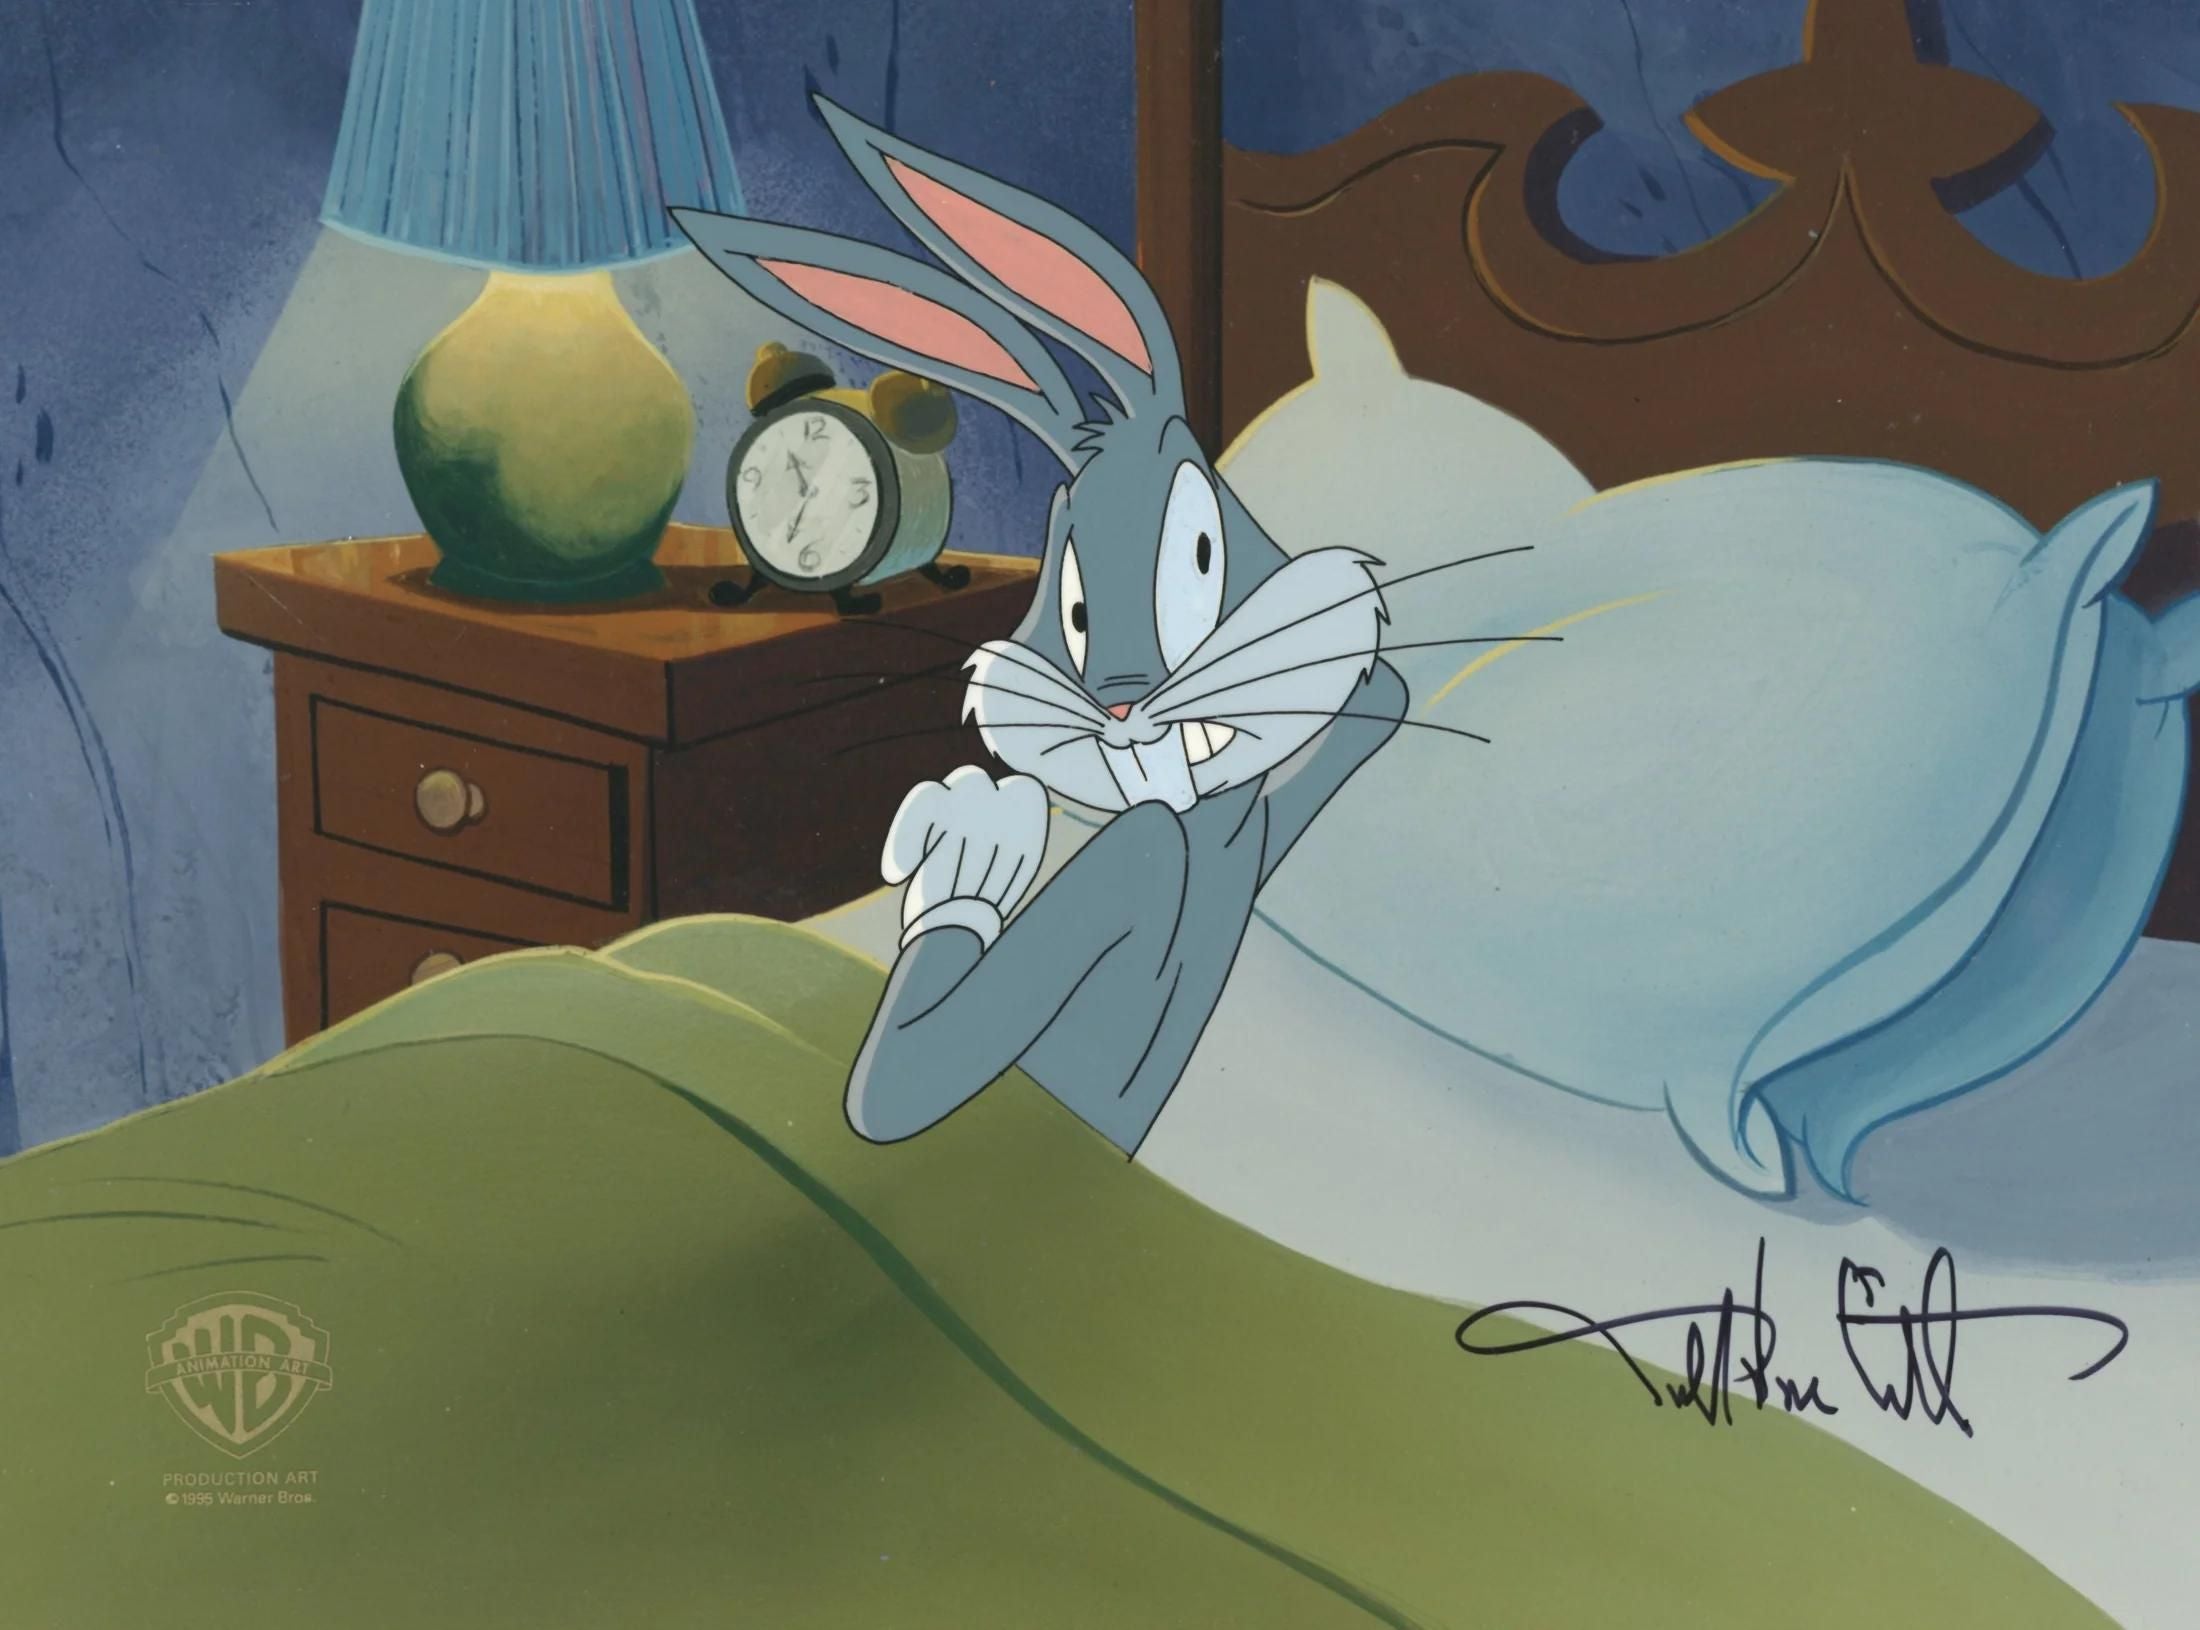 Bugs Bunny in bed